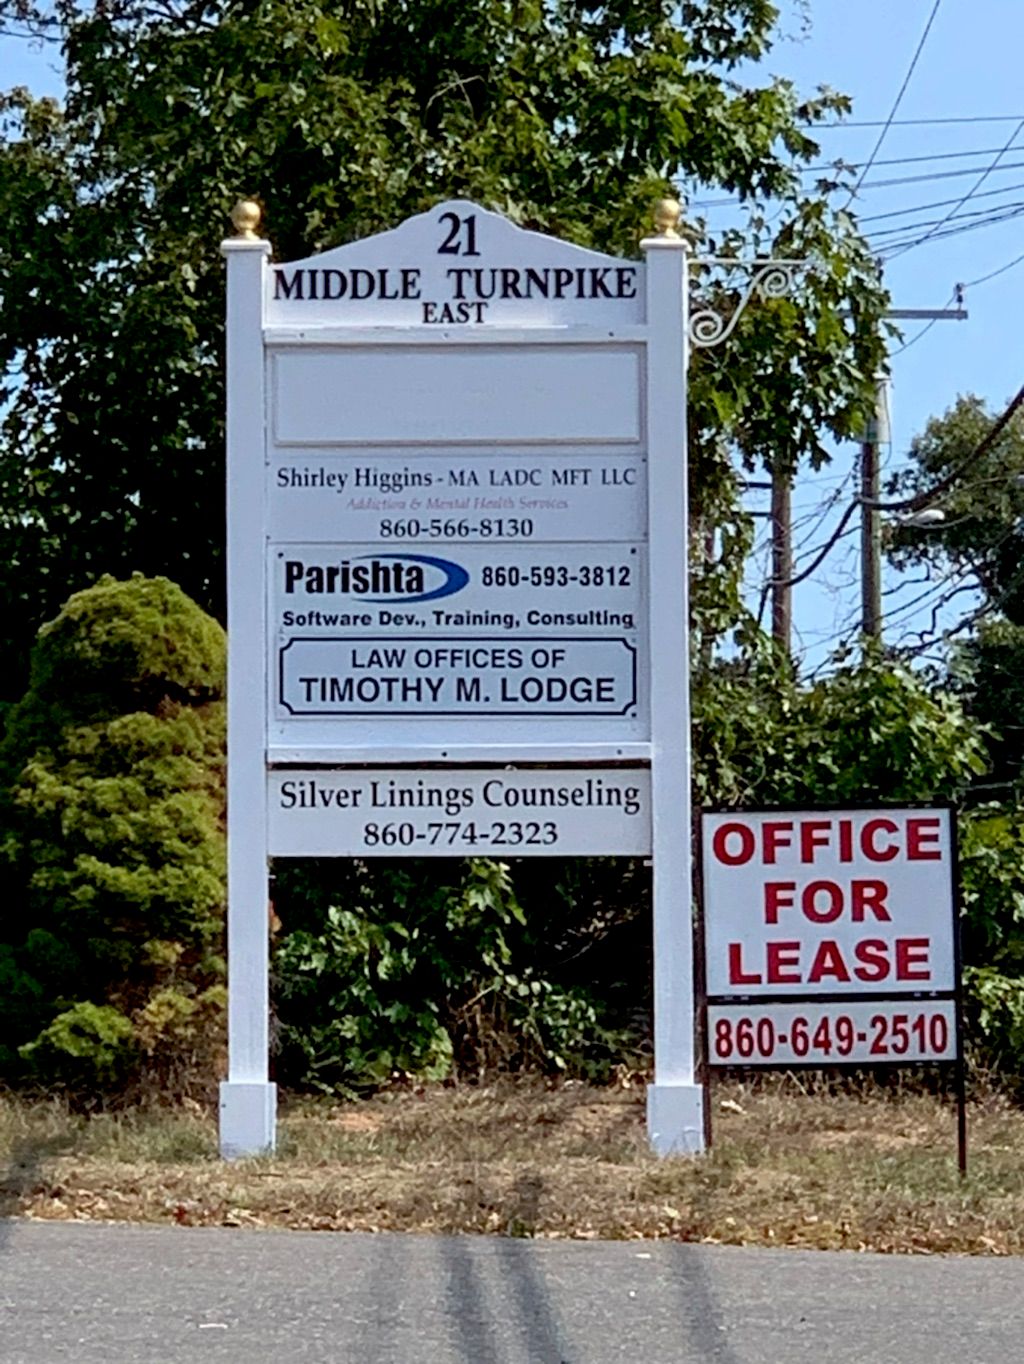 Law Office of Timothy M. Lodge